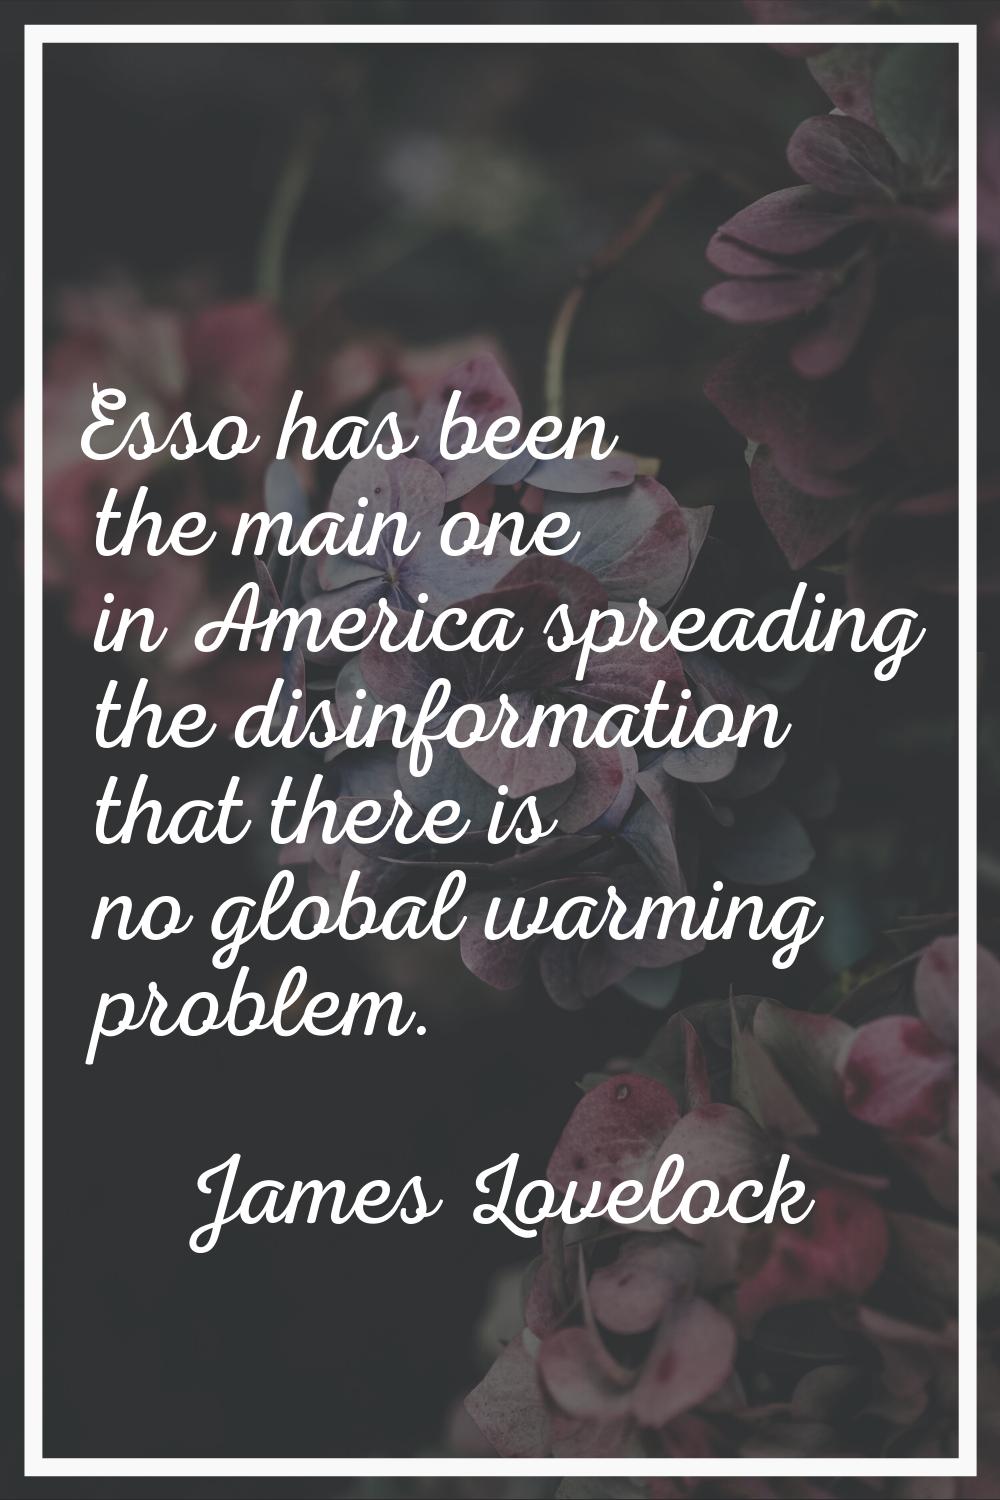 Esso has been the main one in America spreading the disinformation that there is no global warming 